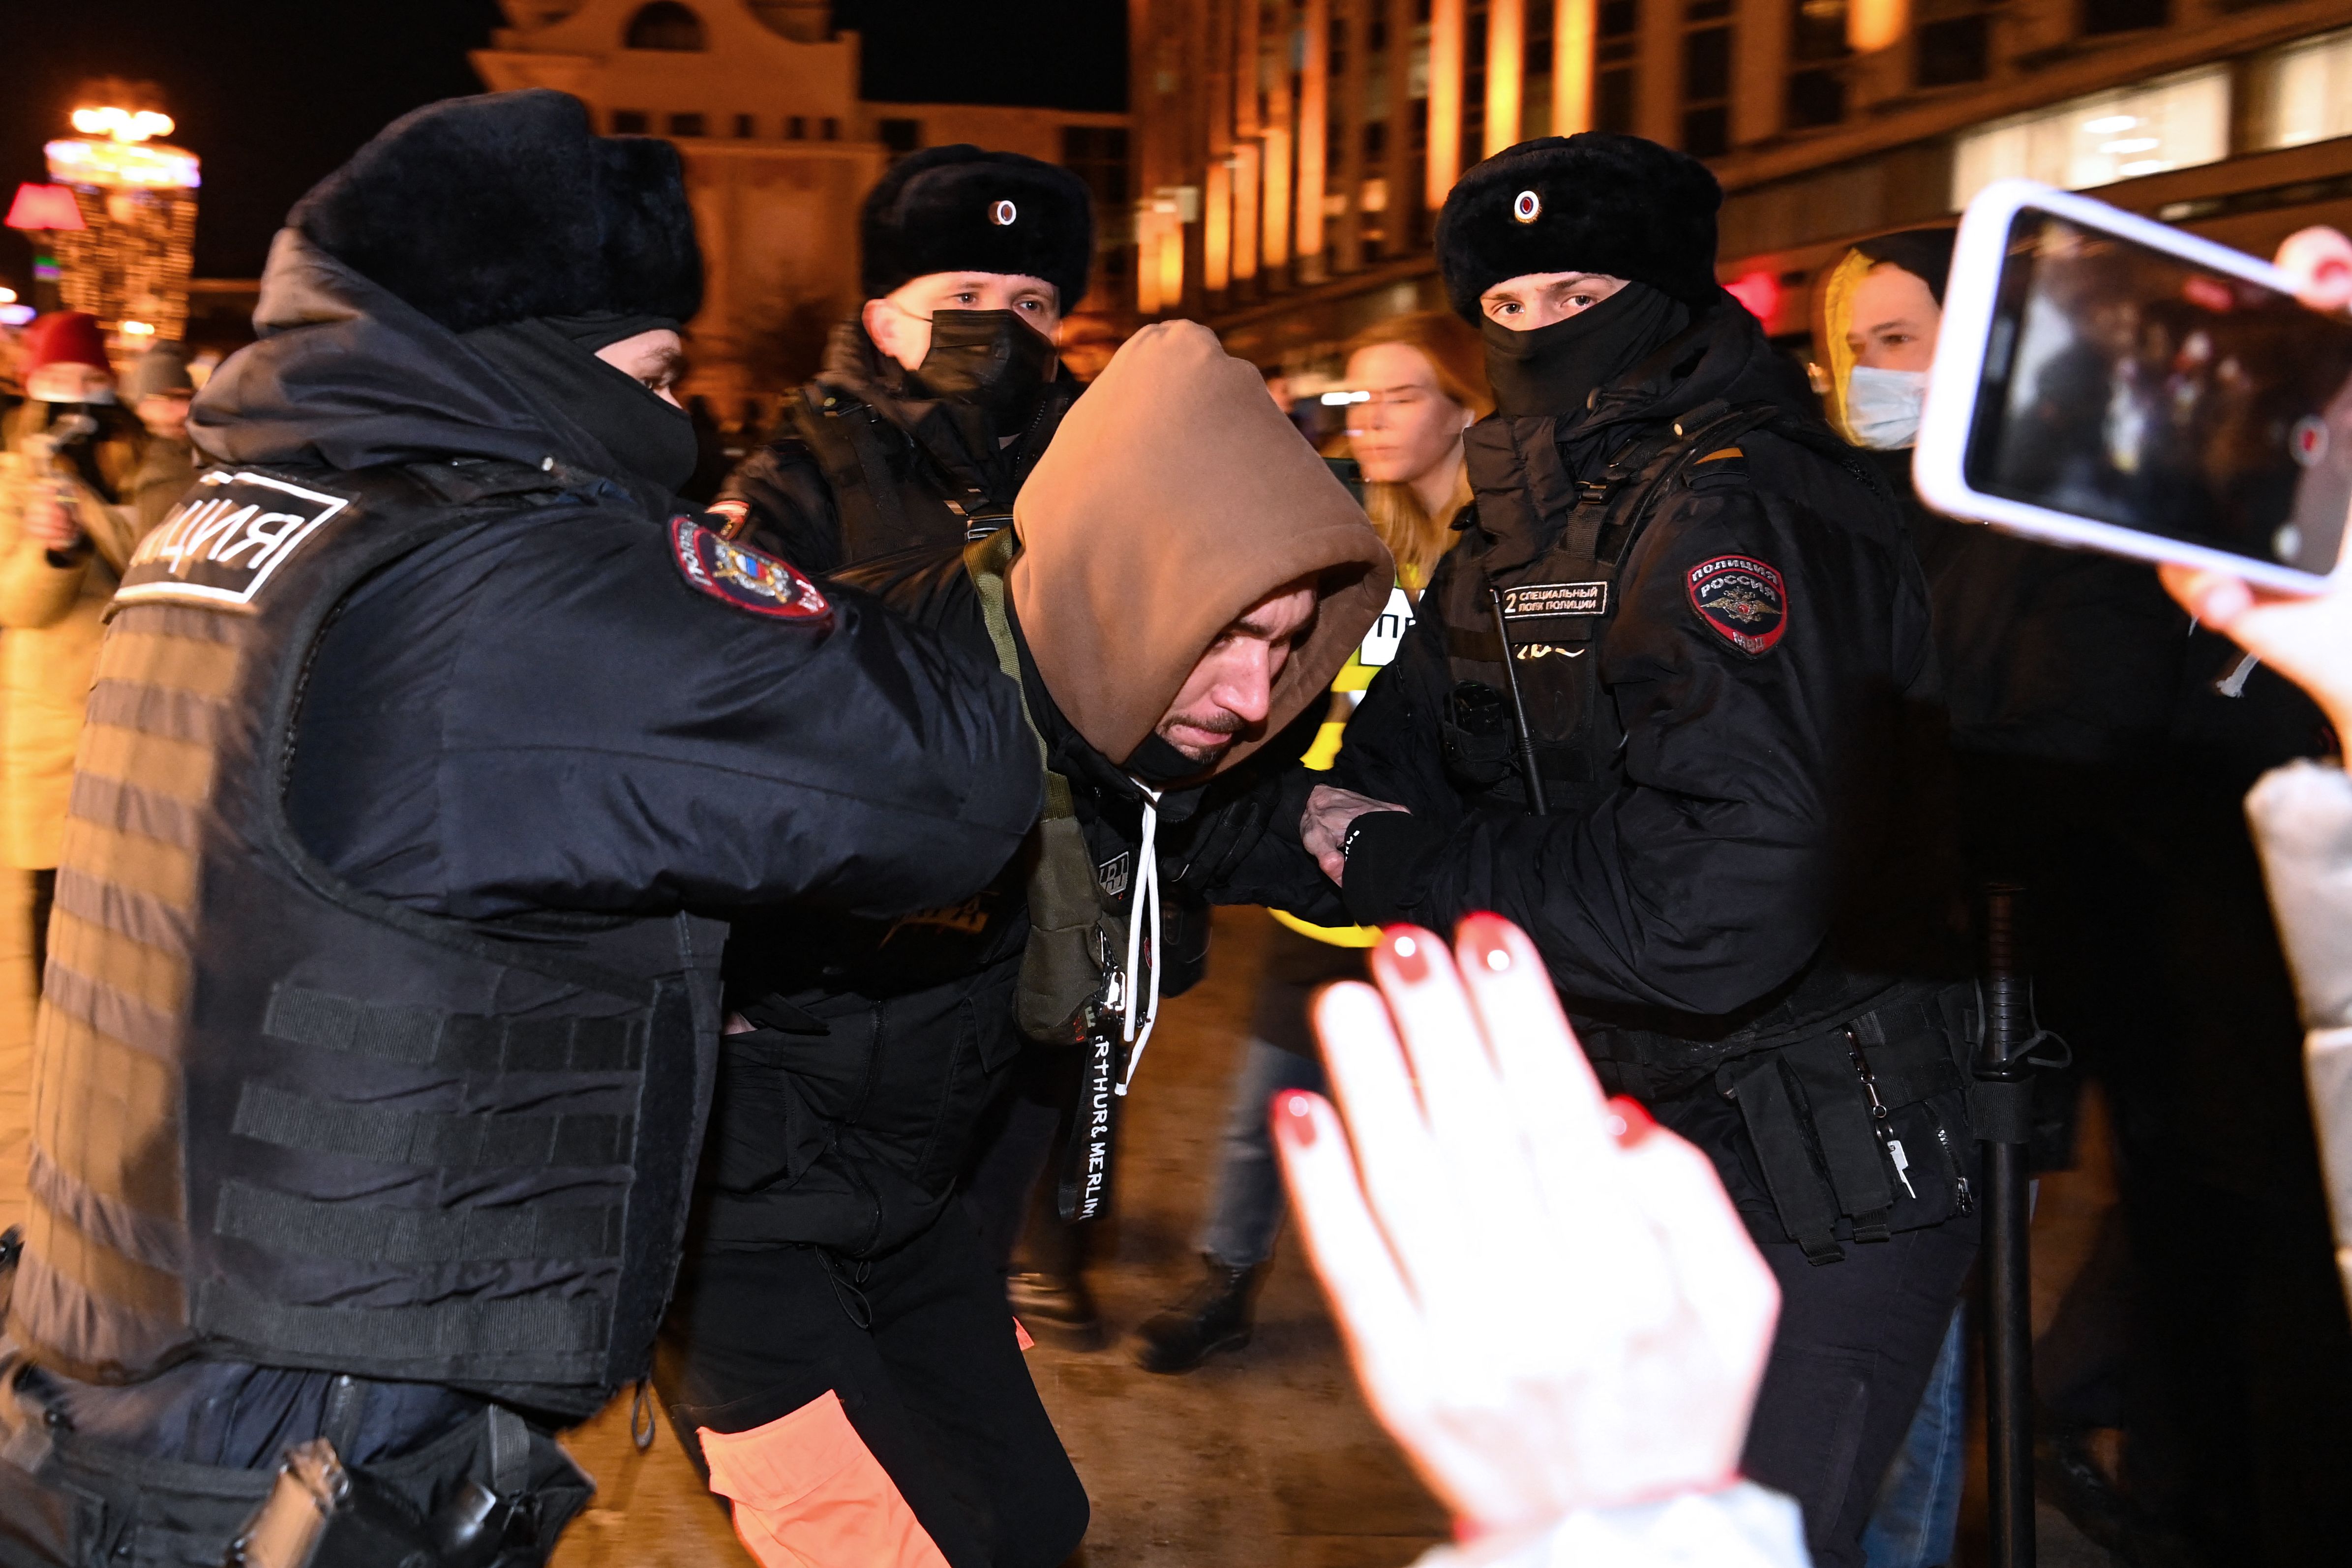 Moscow police detain an anti-war protester